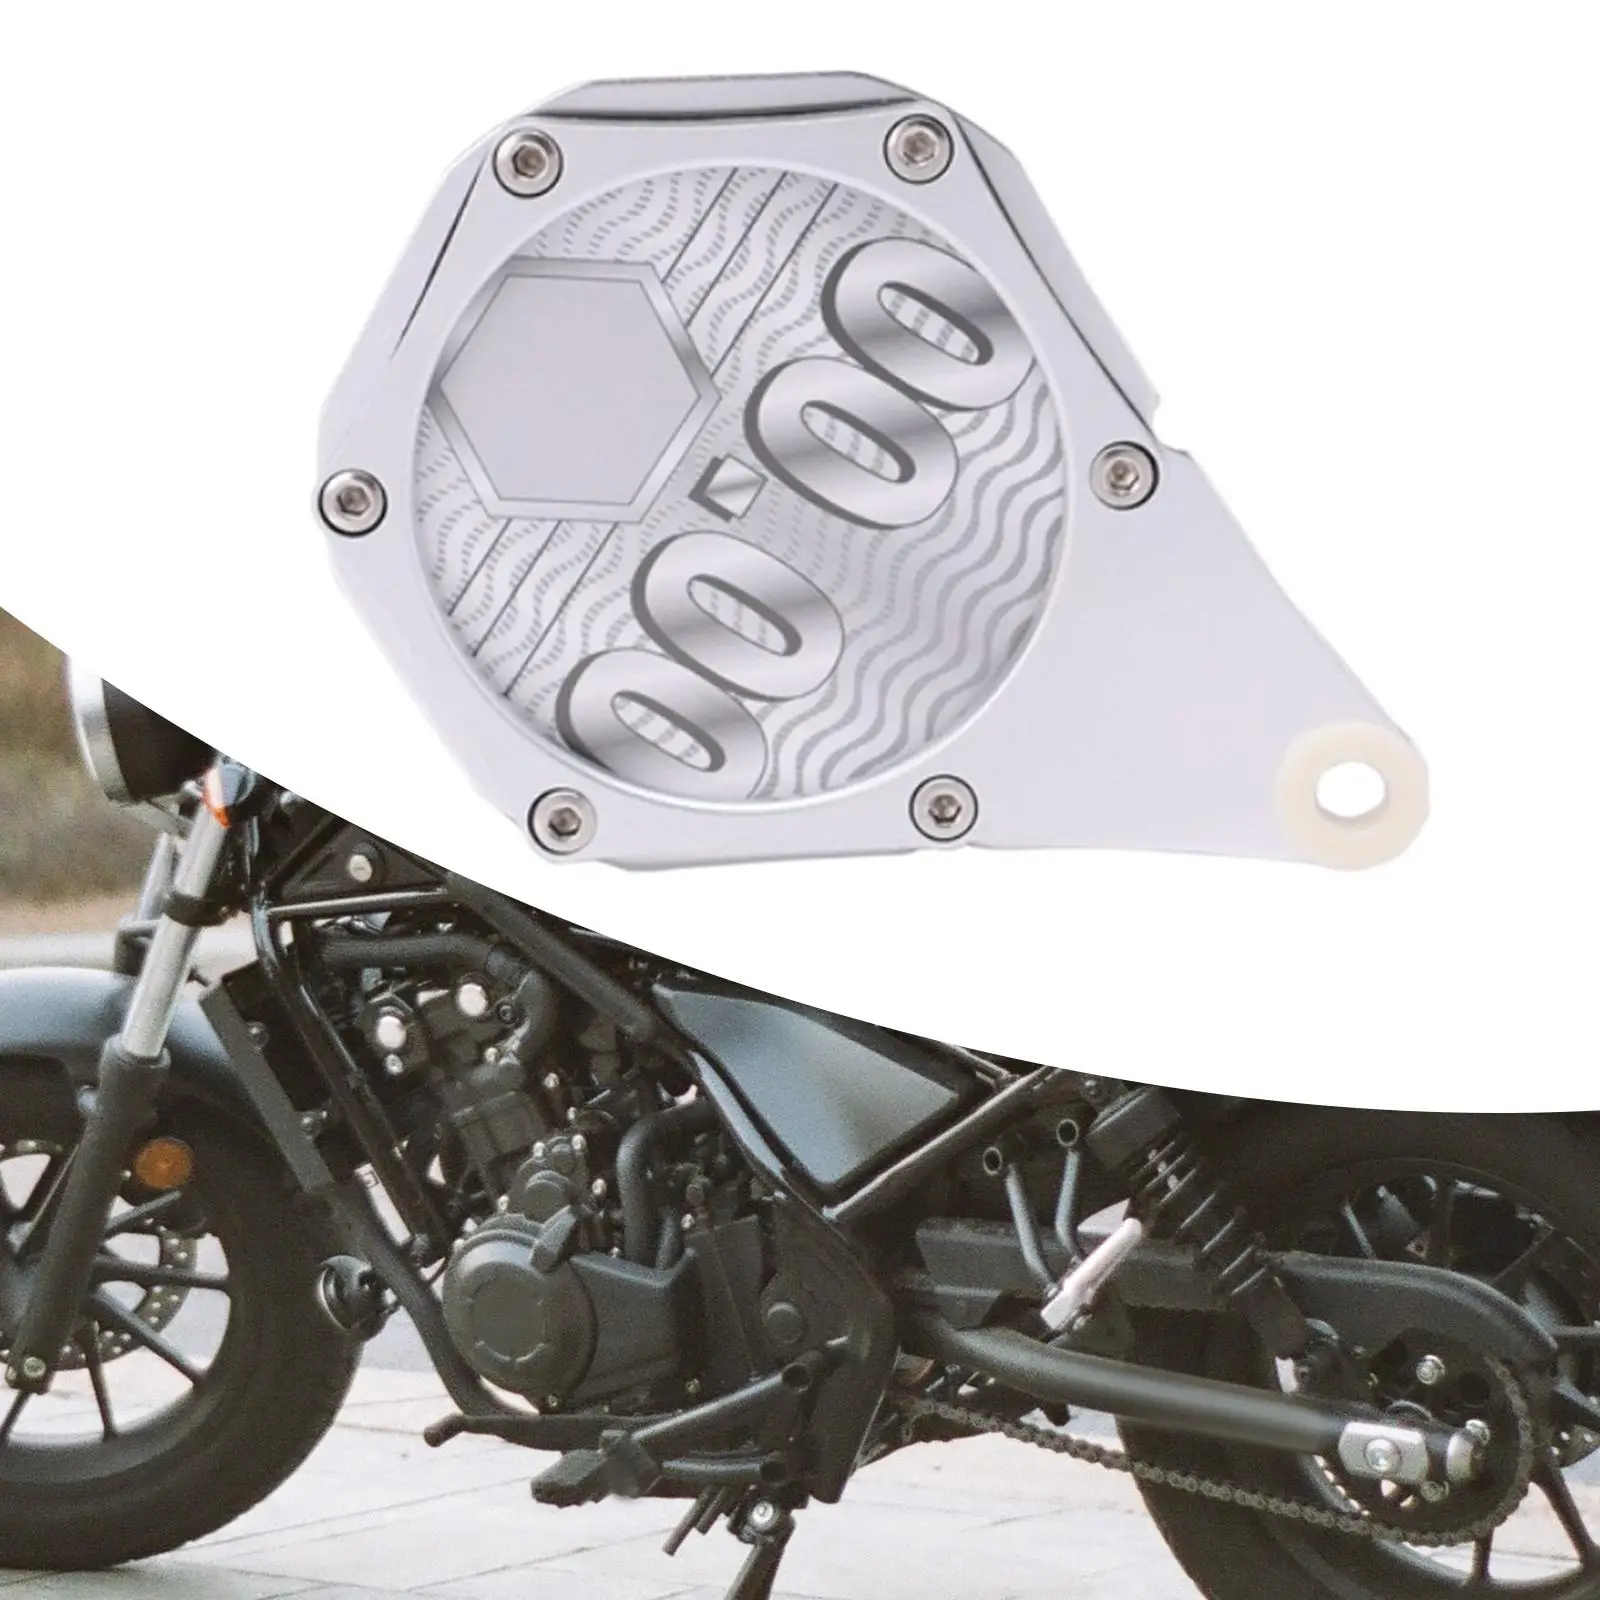 Hexagon Tax Disc Plate Tax Disc Permit Card for Bike Motorcycle Durable